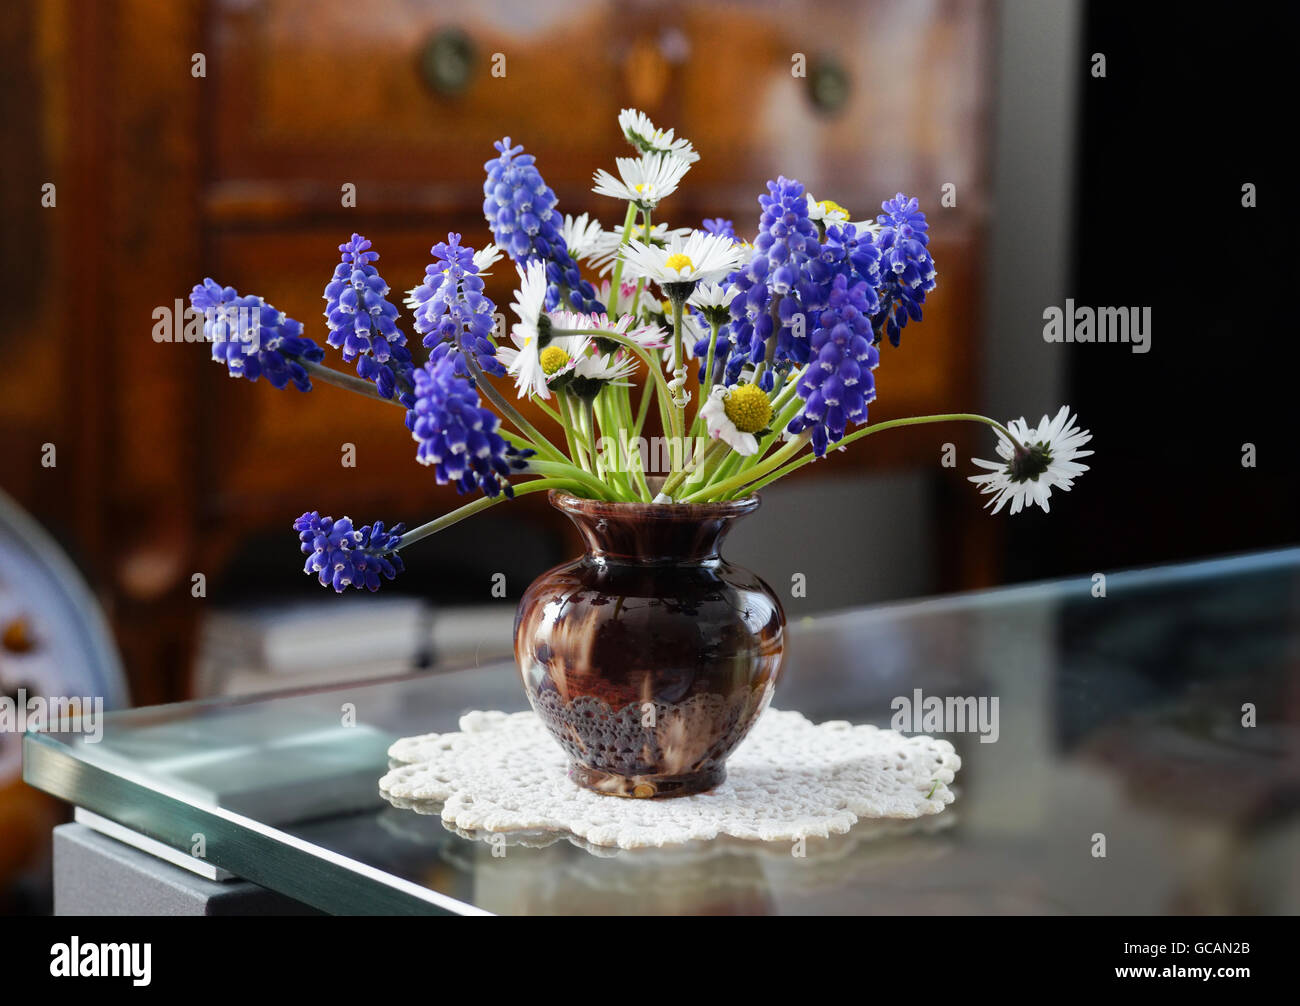 Small brown vase with daisies and blue grape hyacinths Stock Photo